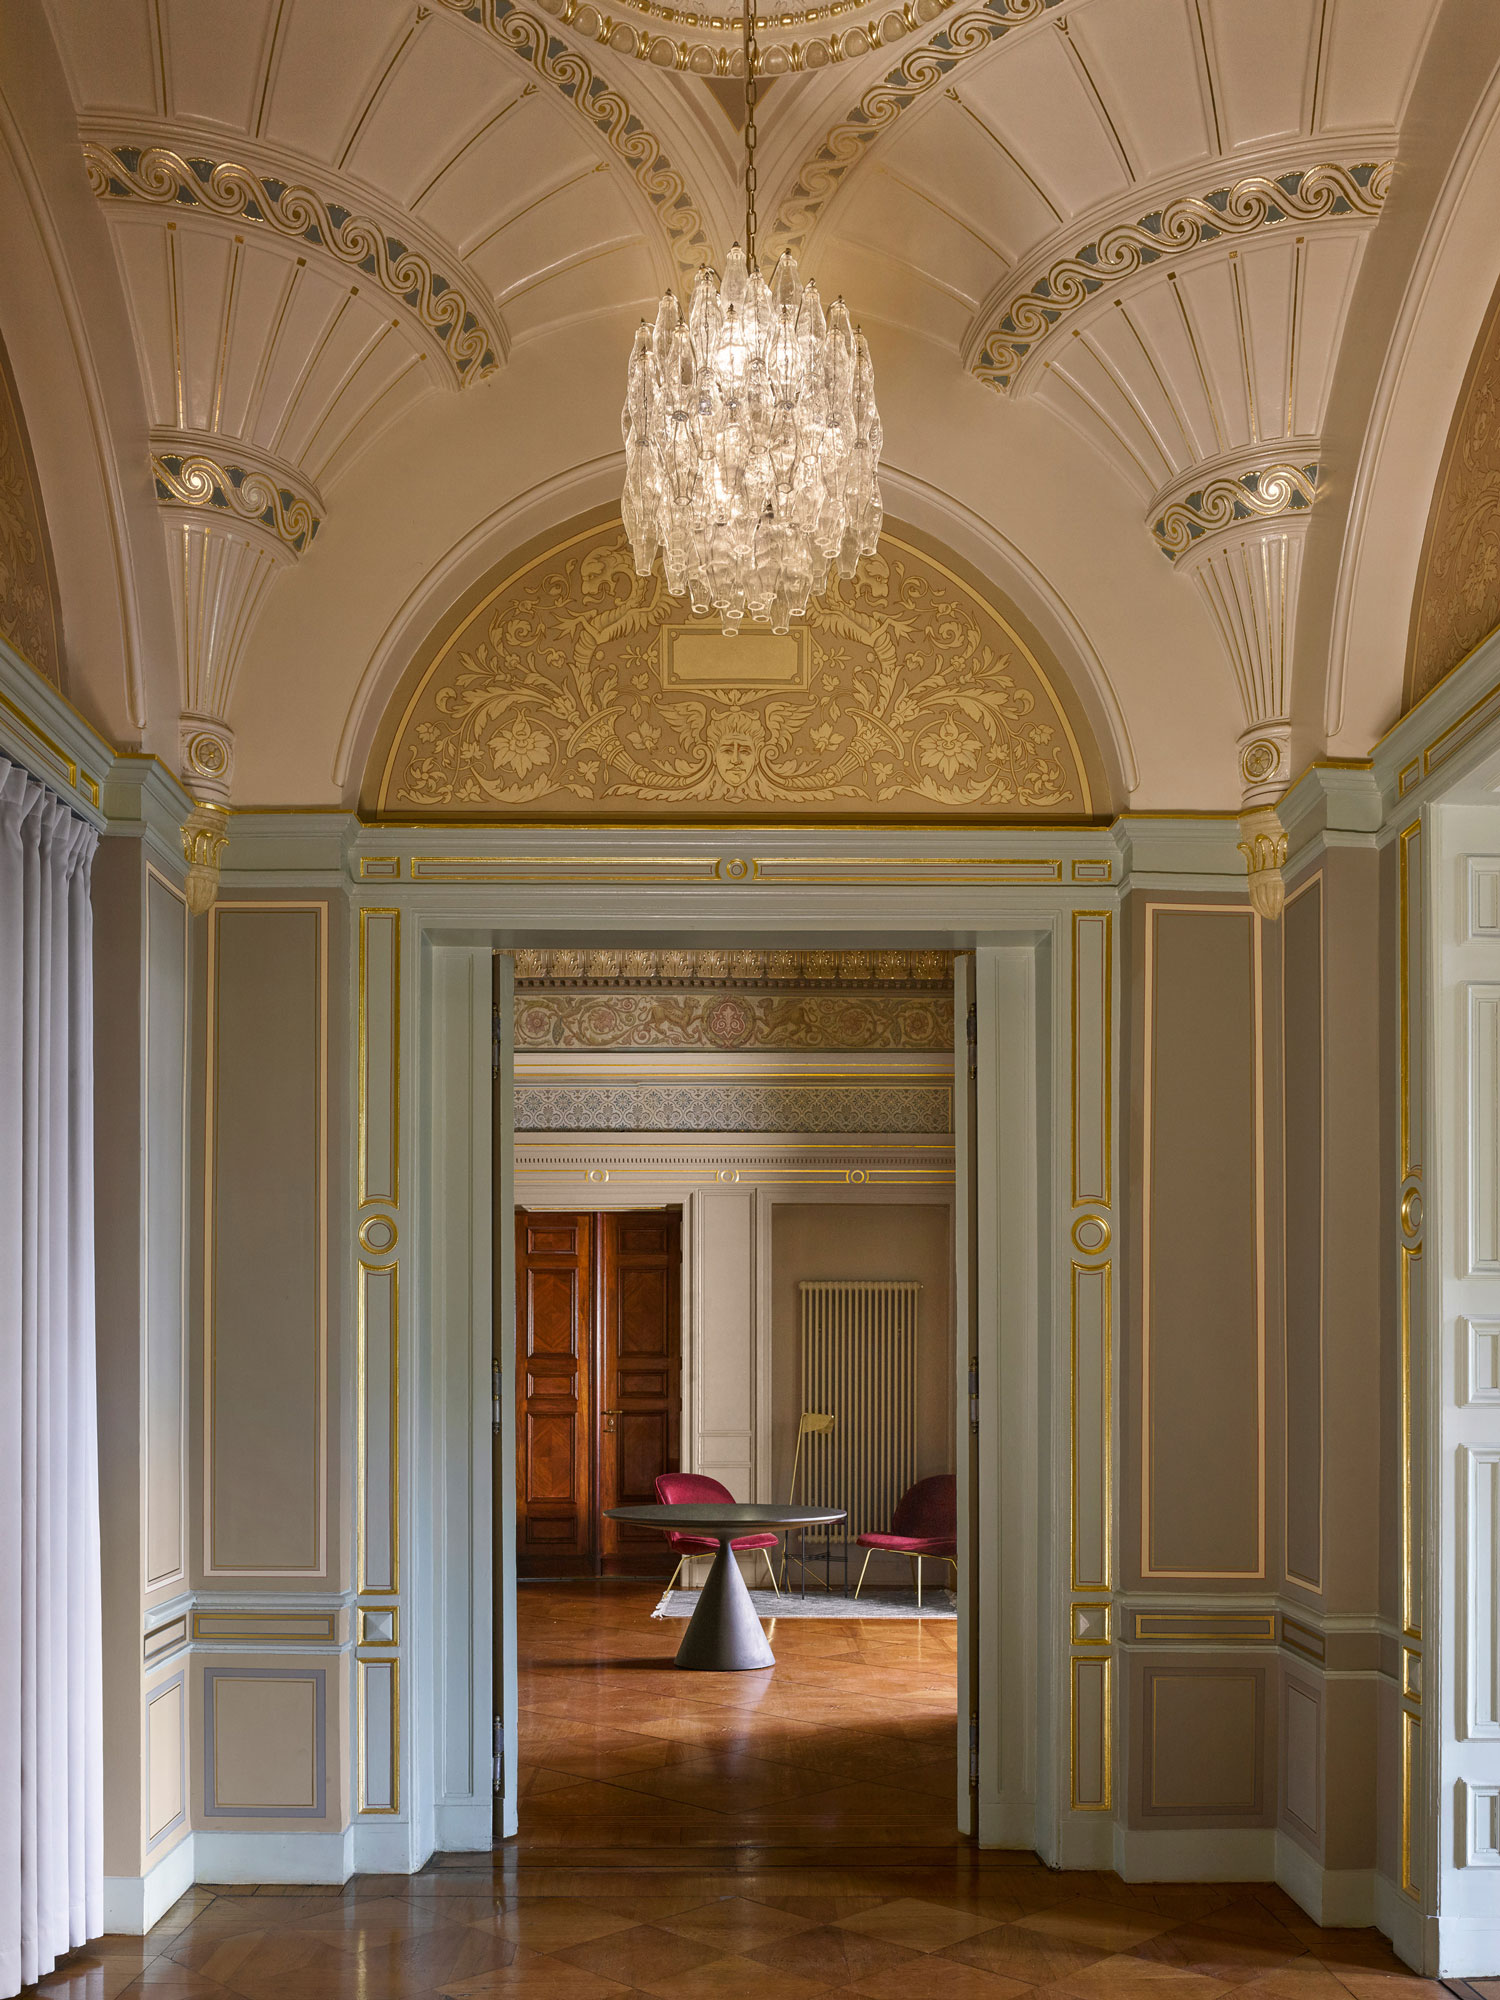 Grand C19th Palais in Berlin Reimagined as an Office by David Kohn Architects.-0